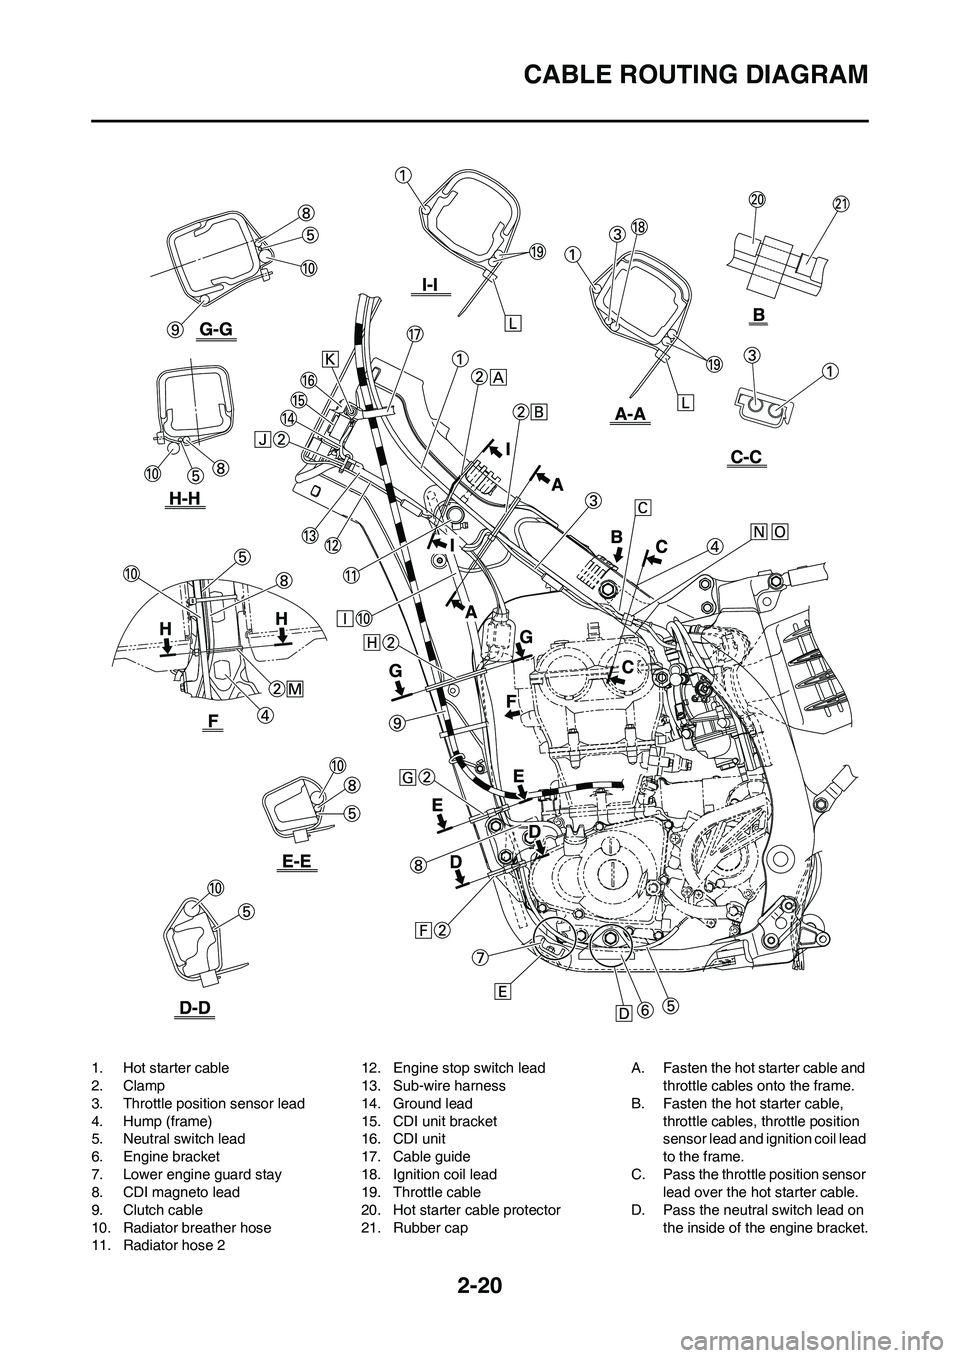 YAMAHA YZ450F 2009  Owners Manual 2-20
CABLE ROUTING DIAGRAM
1. Hot starter cable
2. Clamp
3. Throttle position sensor lead
4. Hump (frame)
5. Neutral switch lead
6. Engine bracket
7. Lower engine guard stay
8. CDI magneto lead
9. Clu